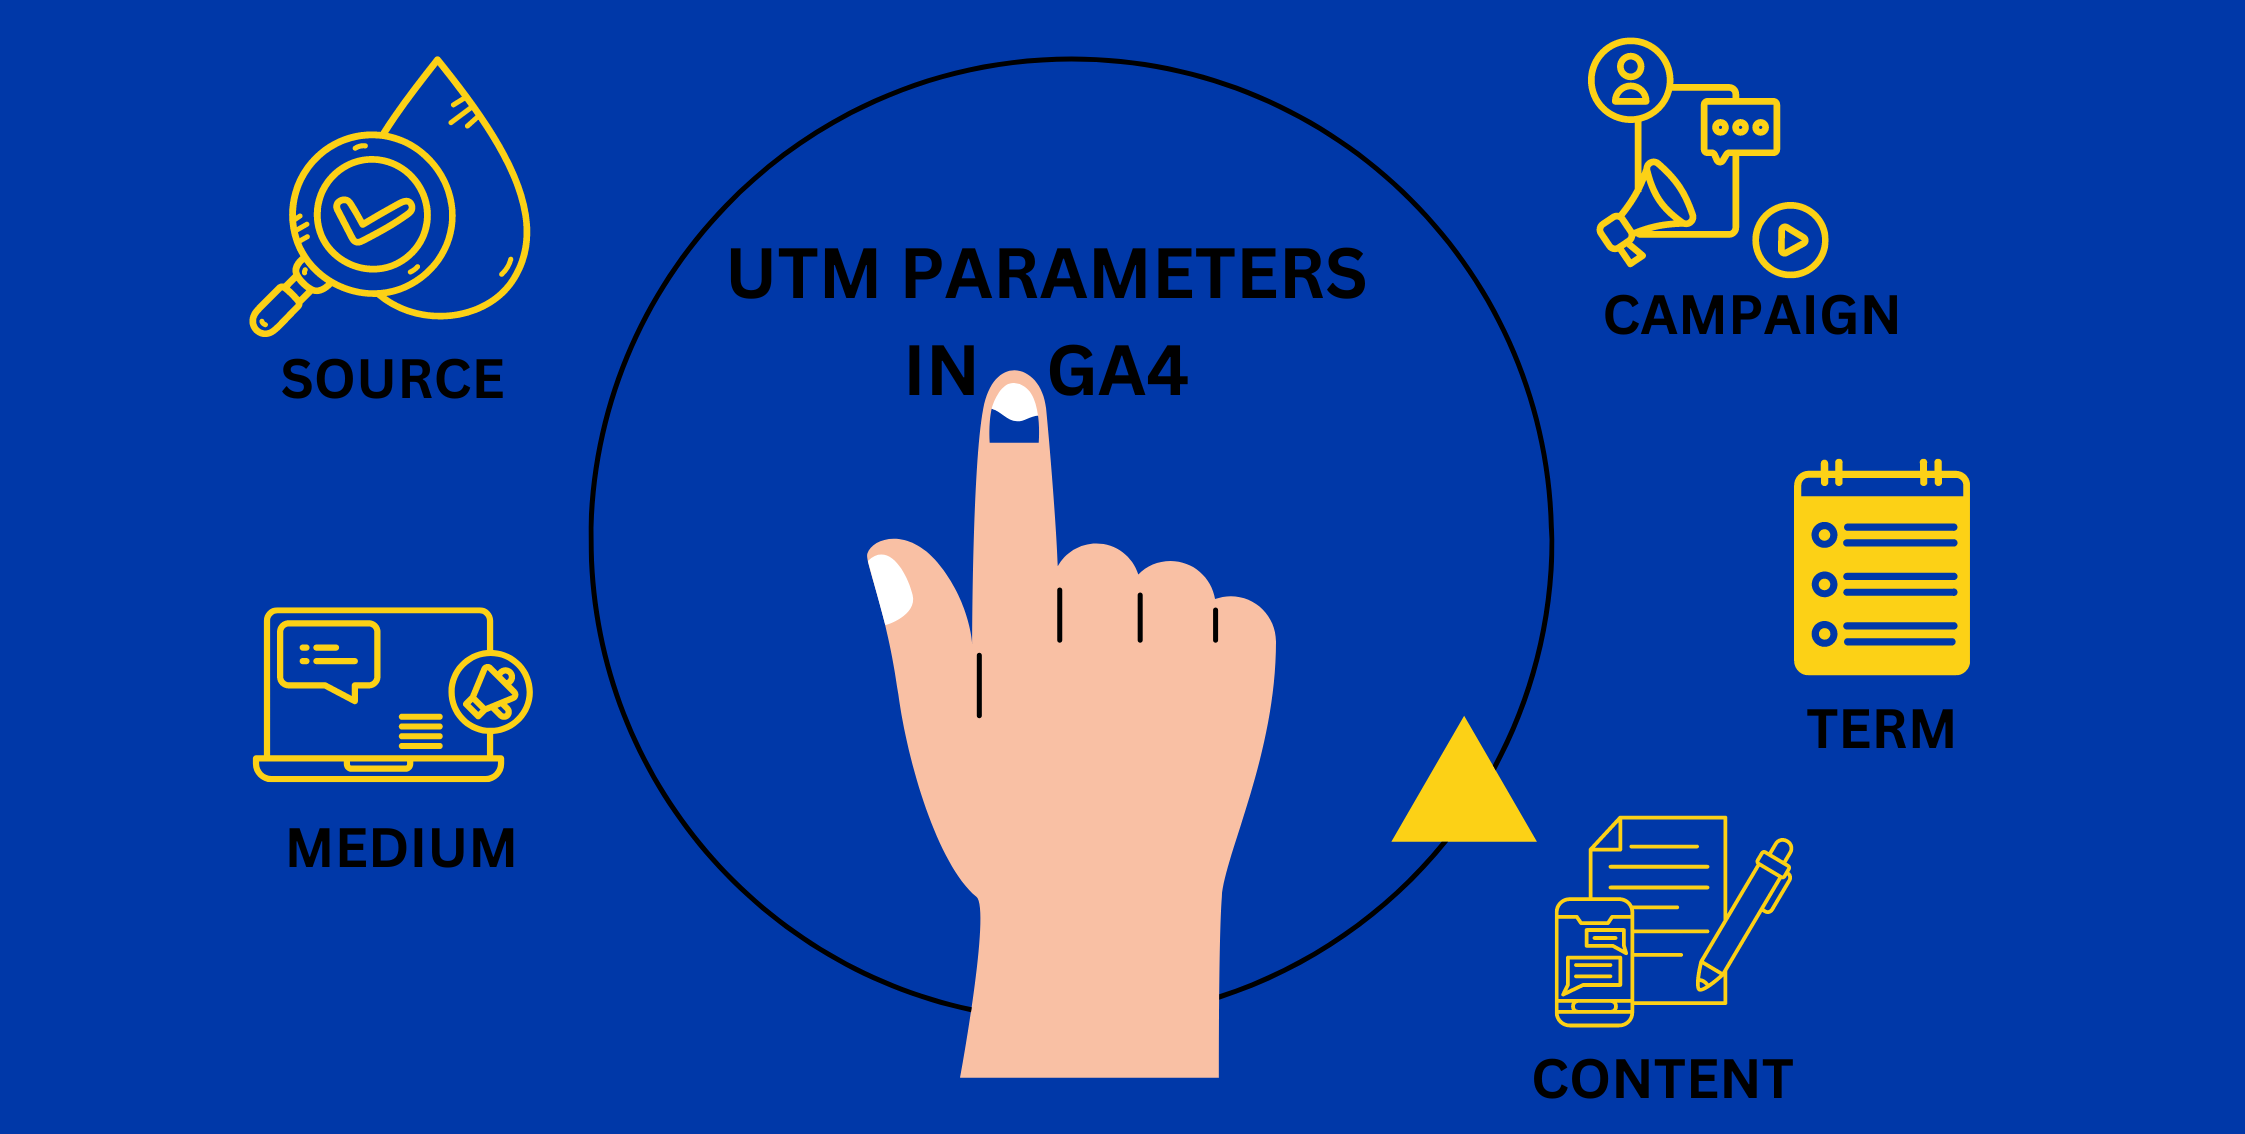 Why UTM Parameters May Not Show up in GA4?